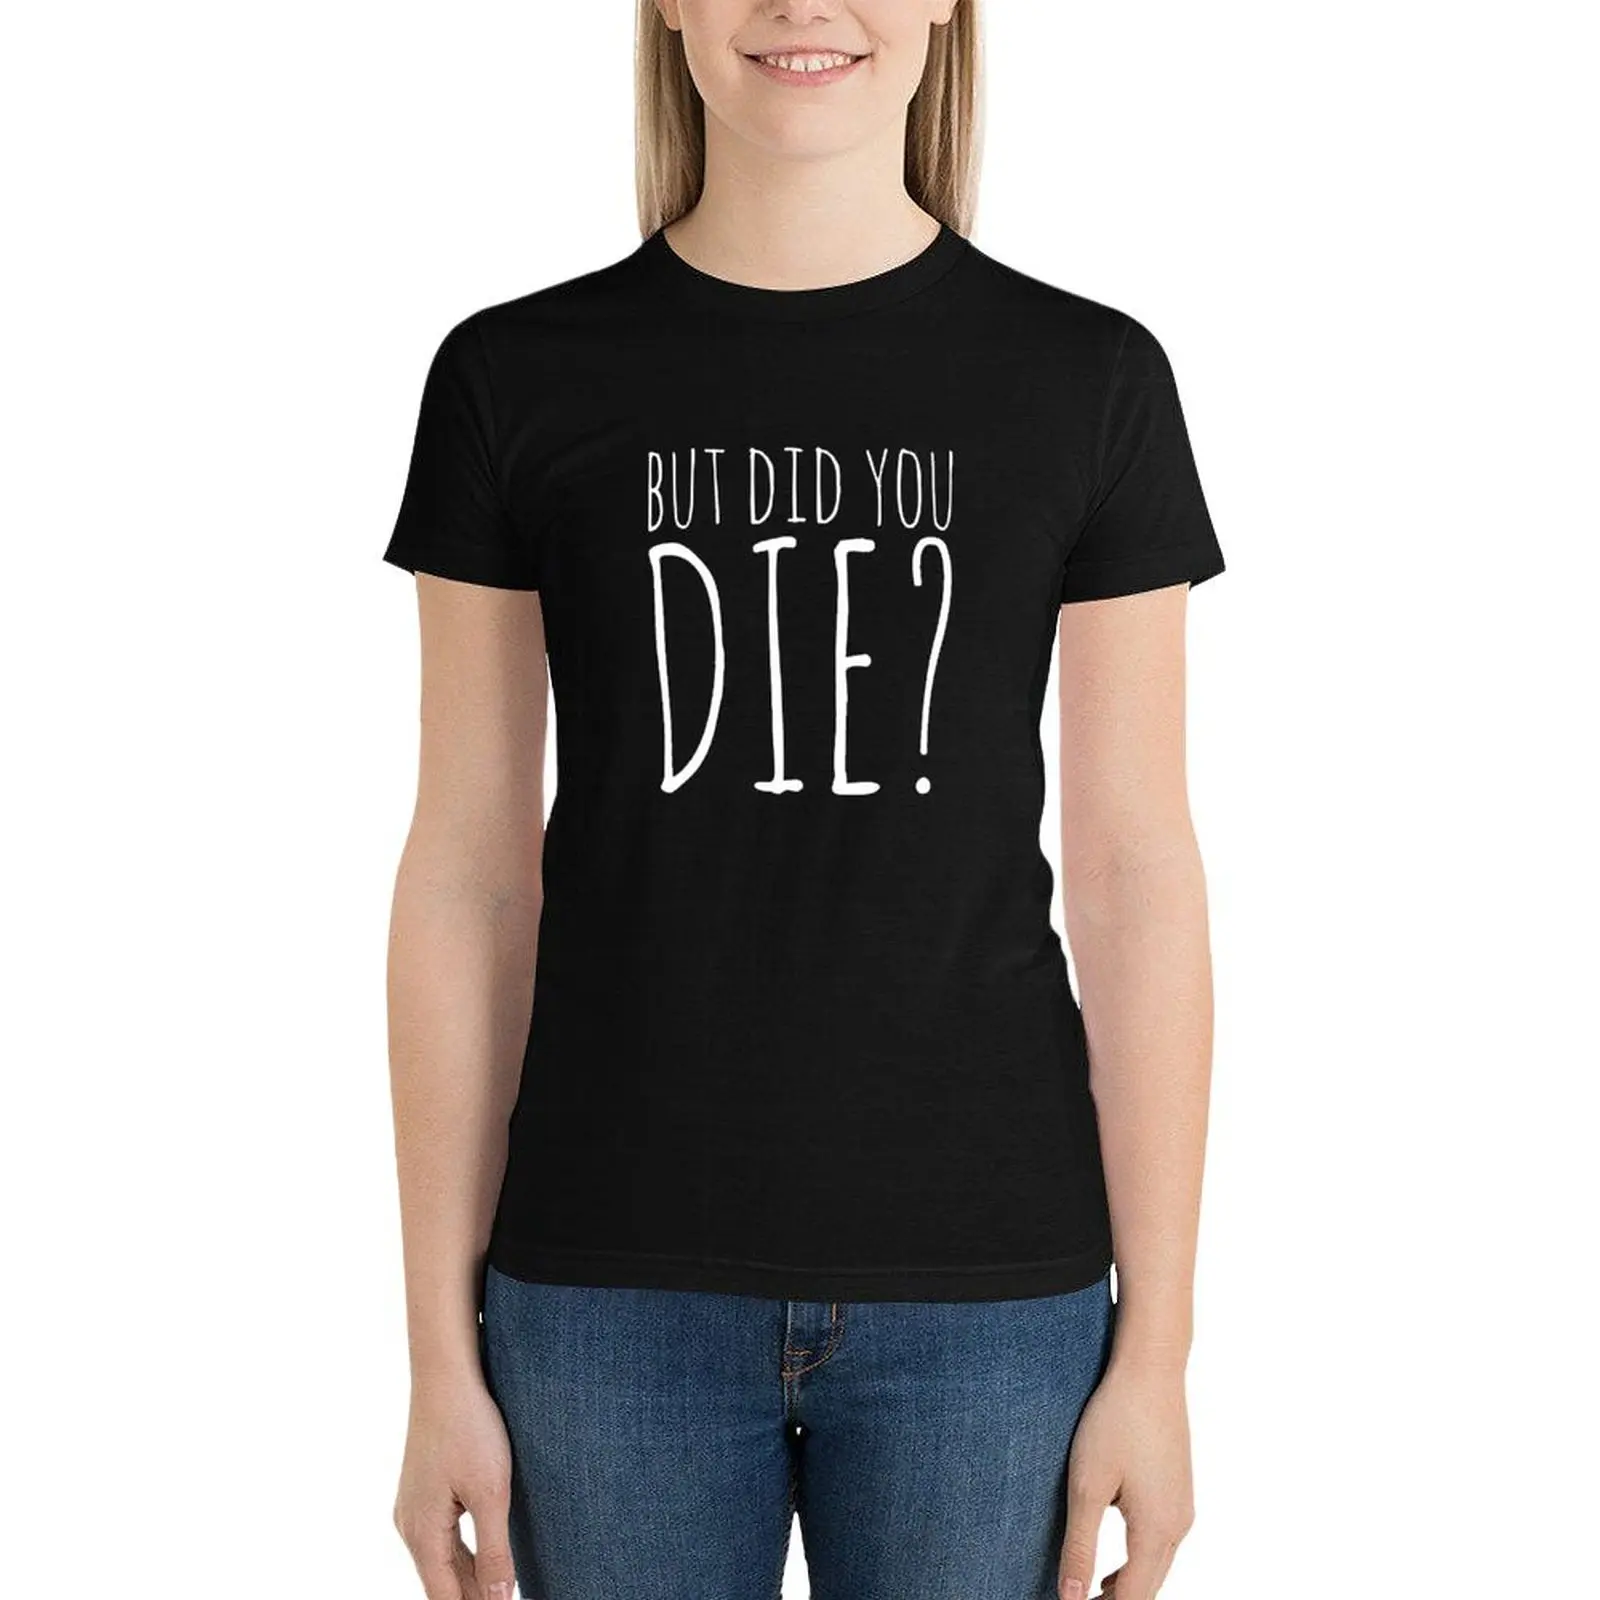 

But Did You Die - White Text T-Shirt lady clothes aesthetic clothes funny T-shirts for Women